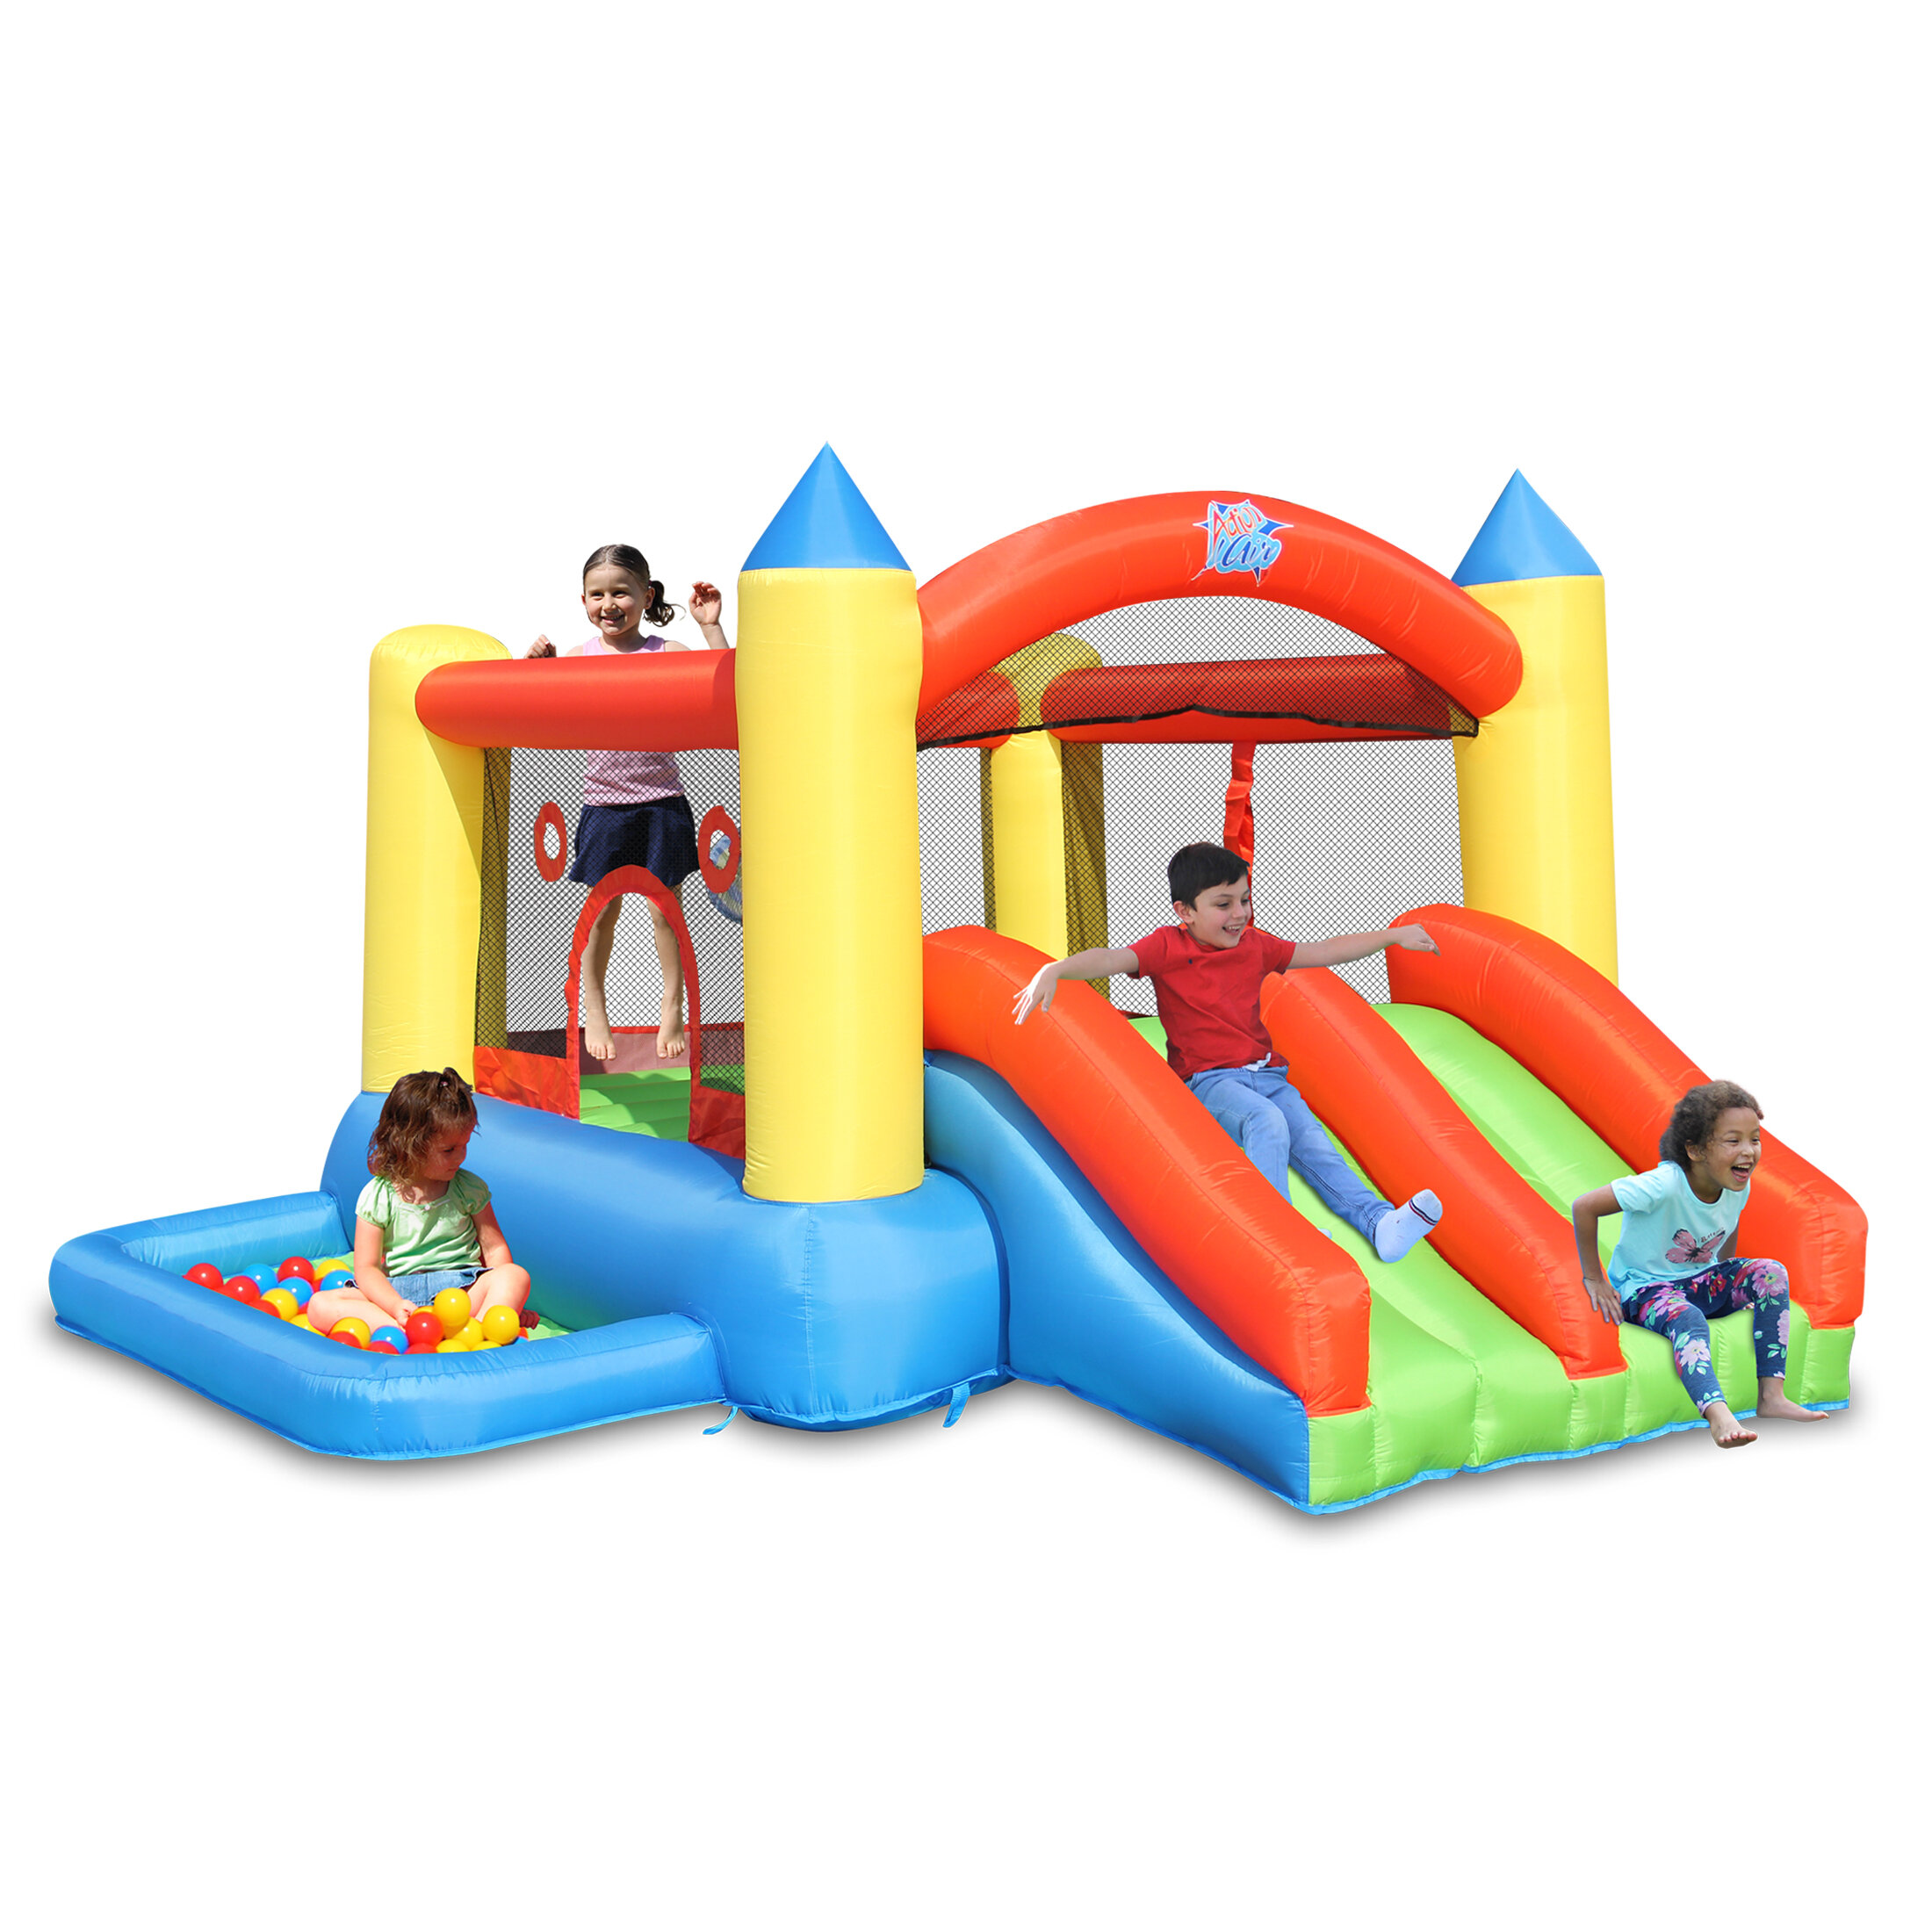 Action Air 10.8' x 11.8' Bounce House with Slide and Blower | Wayfair